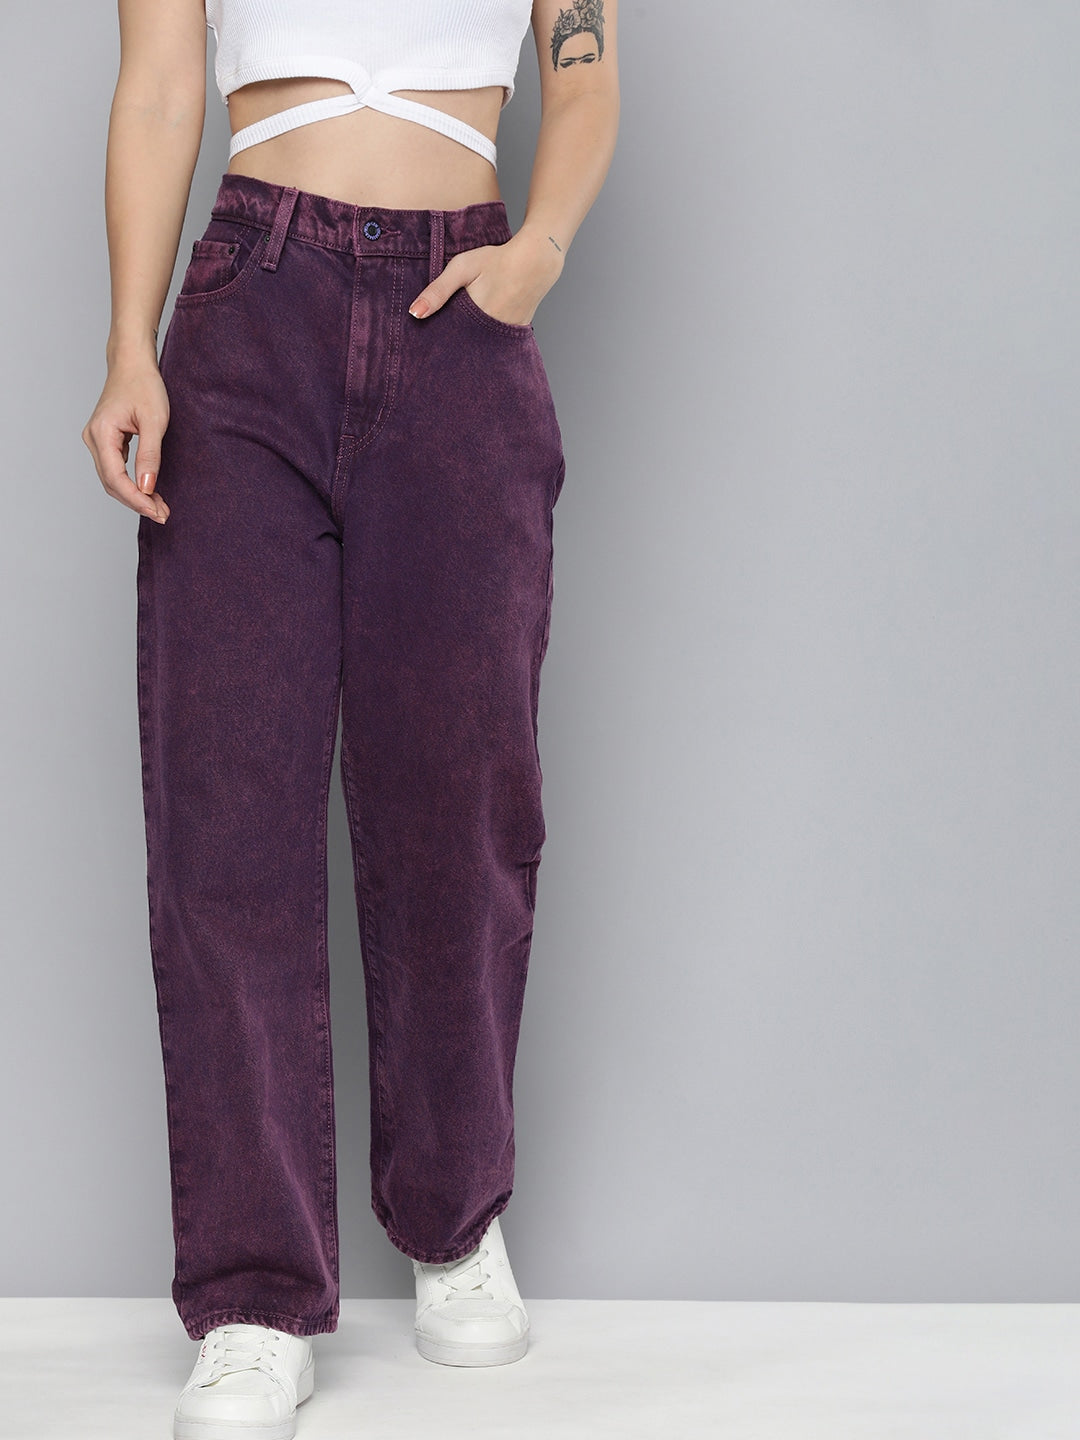 Women's Blue Overalls Pants Washed Big Pockets Loose MID Rise Cotton Denim  Jeans - China Jeans and Denim Jeans price | Made-in-China.com